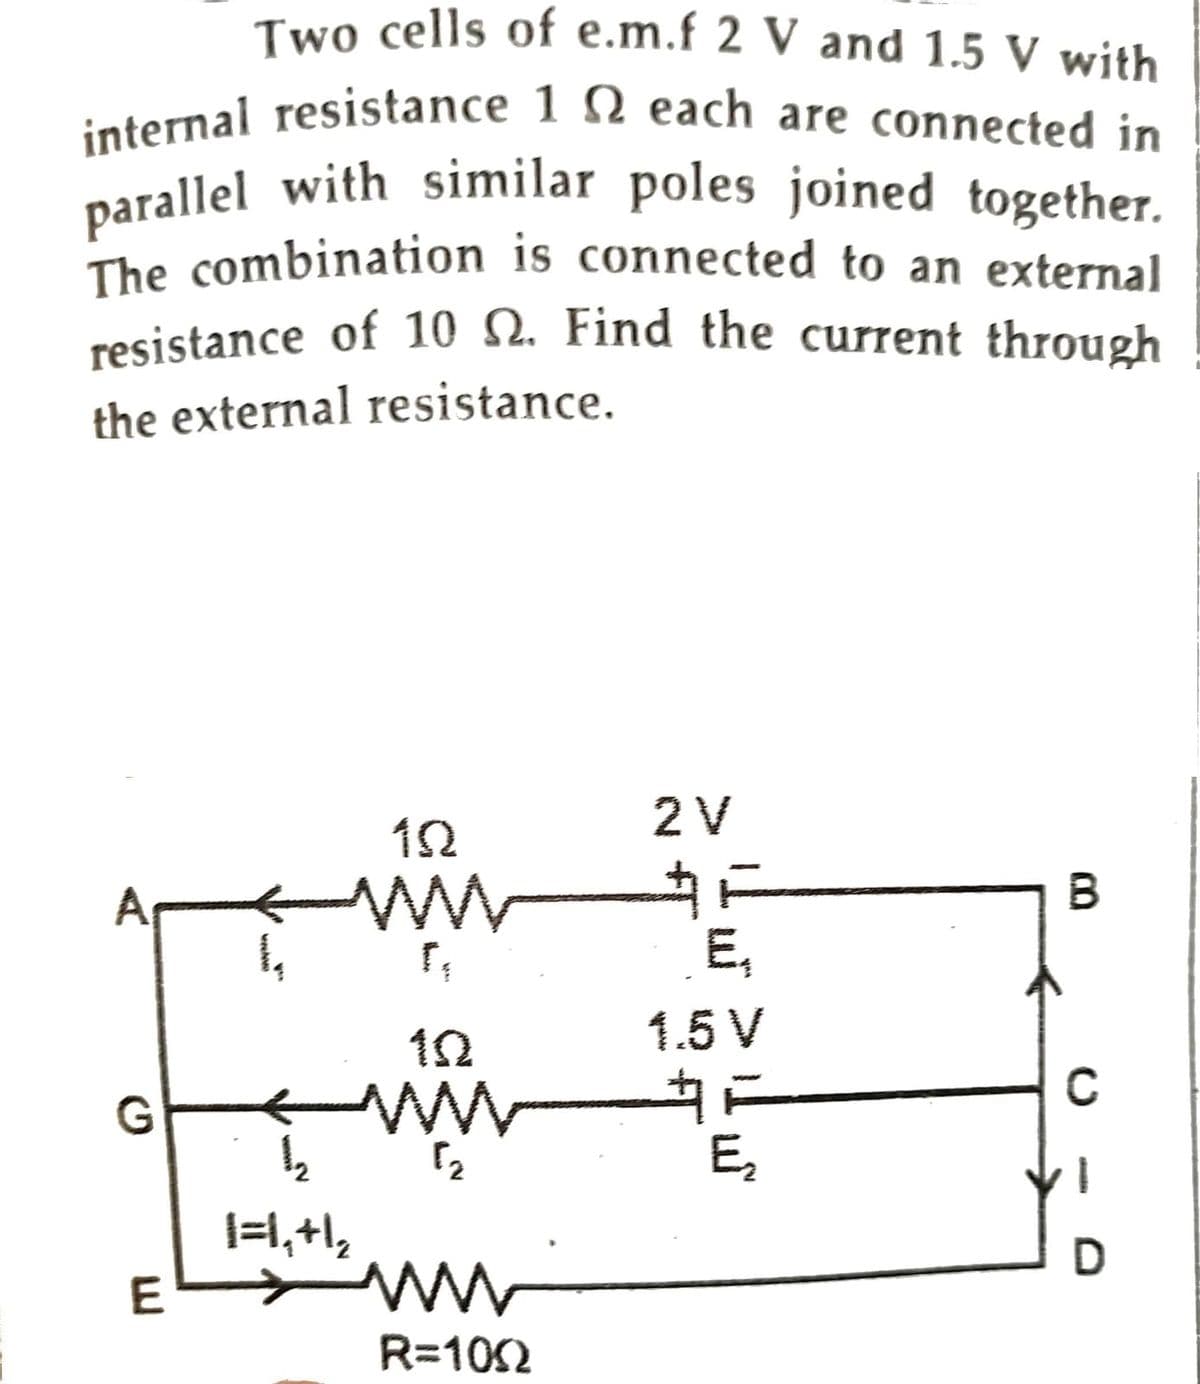 Two cells of e.m.f 2 V and 1.5 V with
internal resistance 1 each are connected in
parallel with similar poles joined together.
The combination is connected to an external
resistance of 10 2. Find the current through
the external resistance.
A
E
1,
152
WWW
[₁
102
ww
1/₂2
1=1₁+1₂
www
R=1002
2 V
E₁
1.5 V
E₂
B
C
D